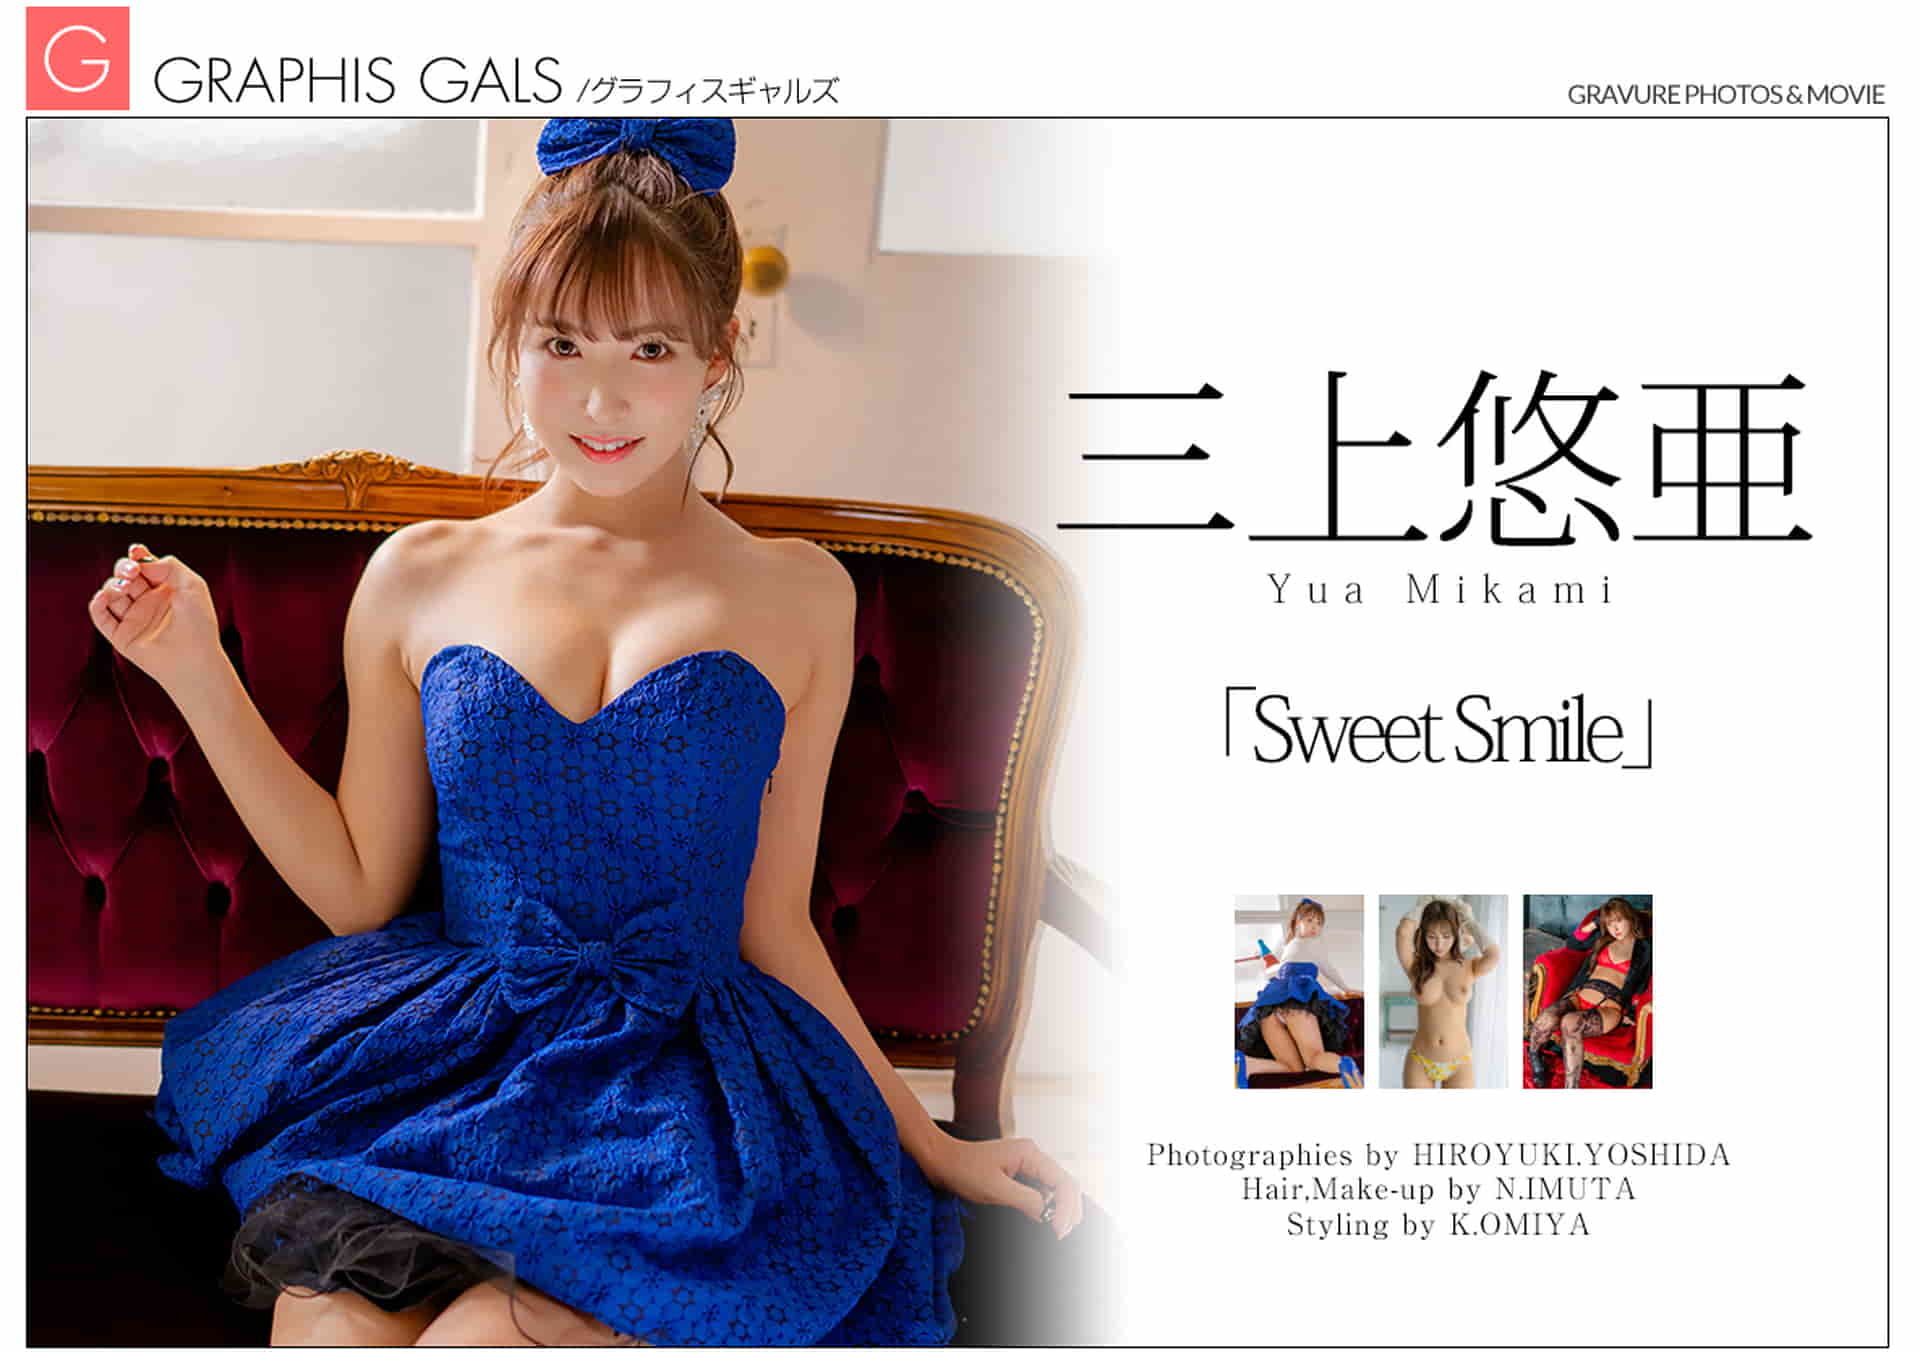 Complete collection of Yua Mikami's photos [Graphis] GALS "Sweet Smile" Yua Mikami